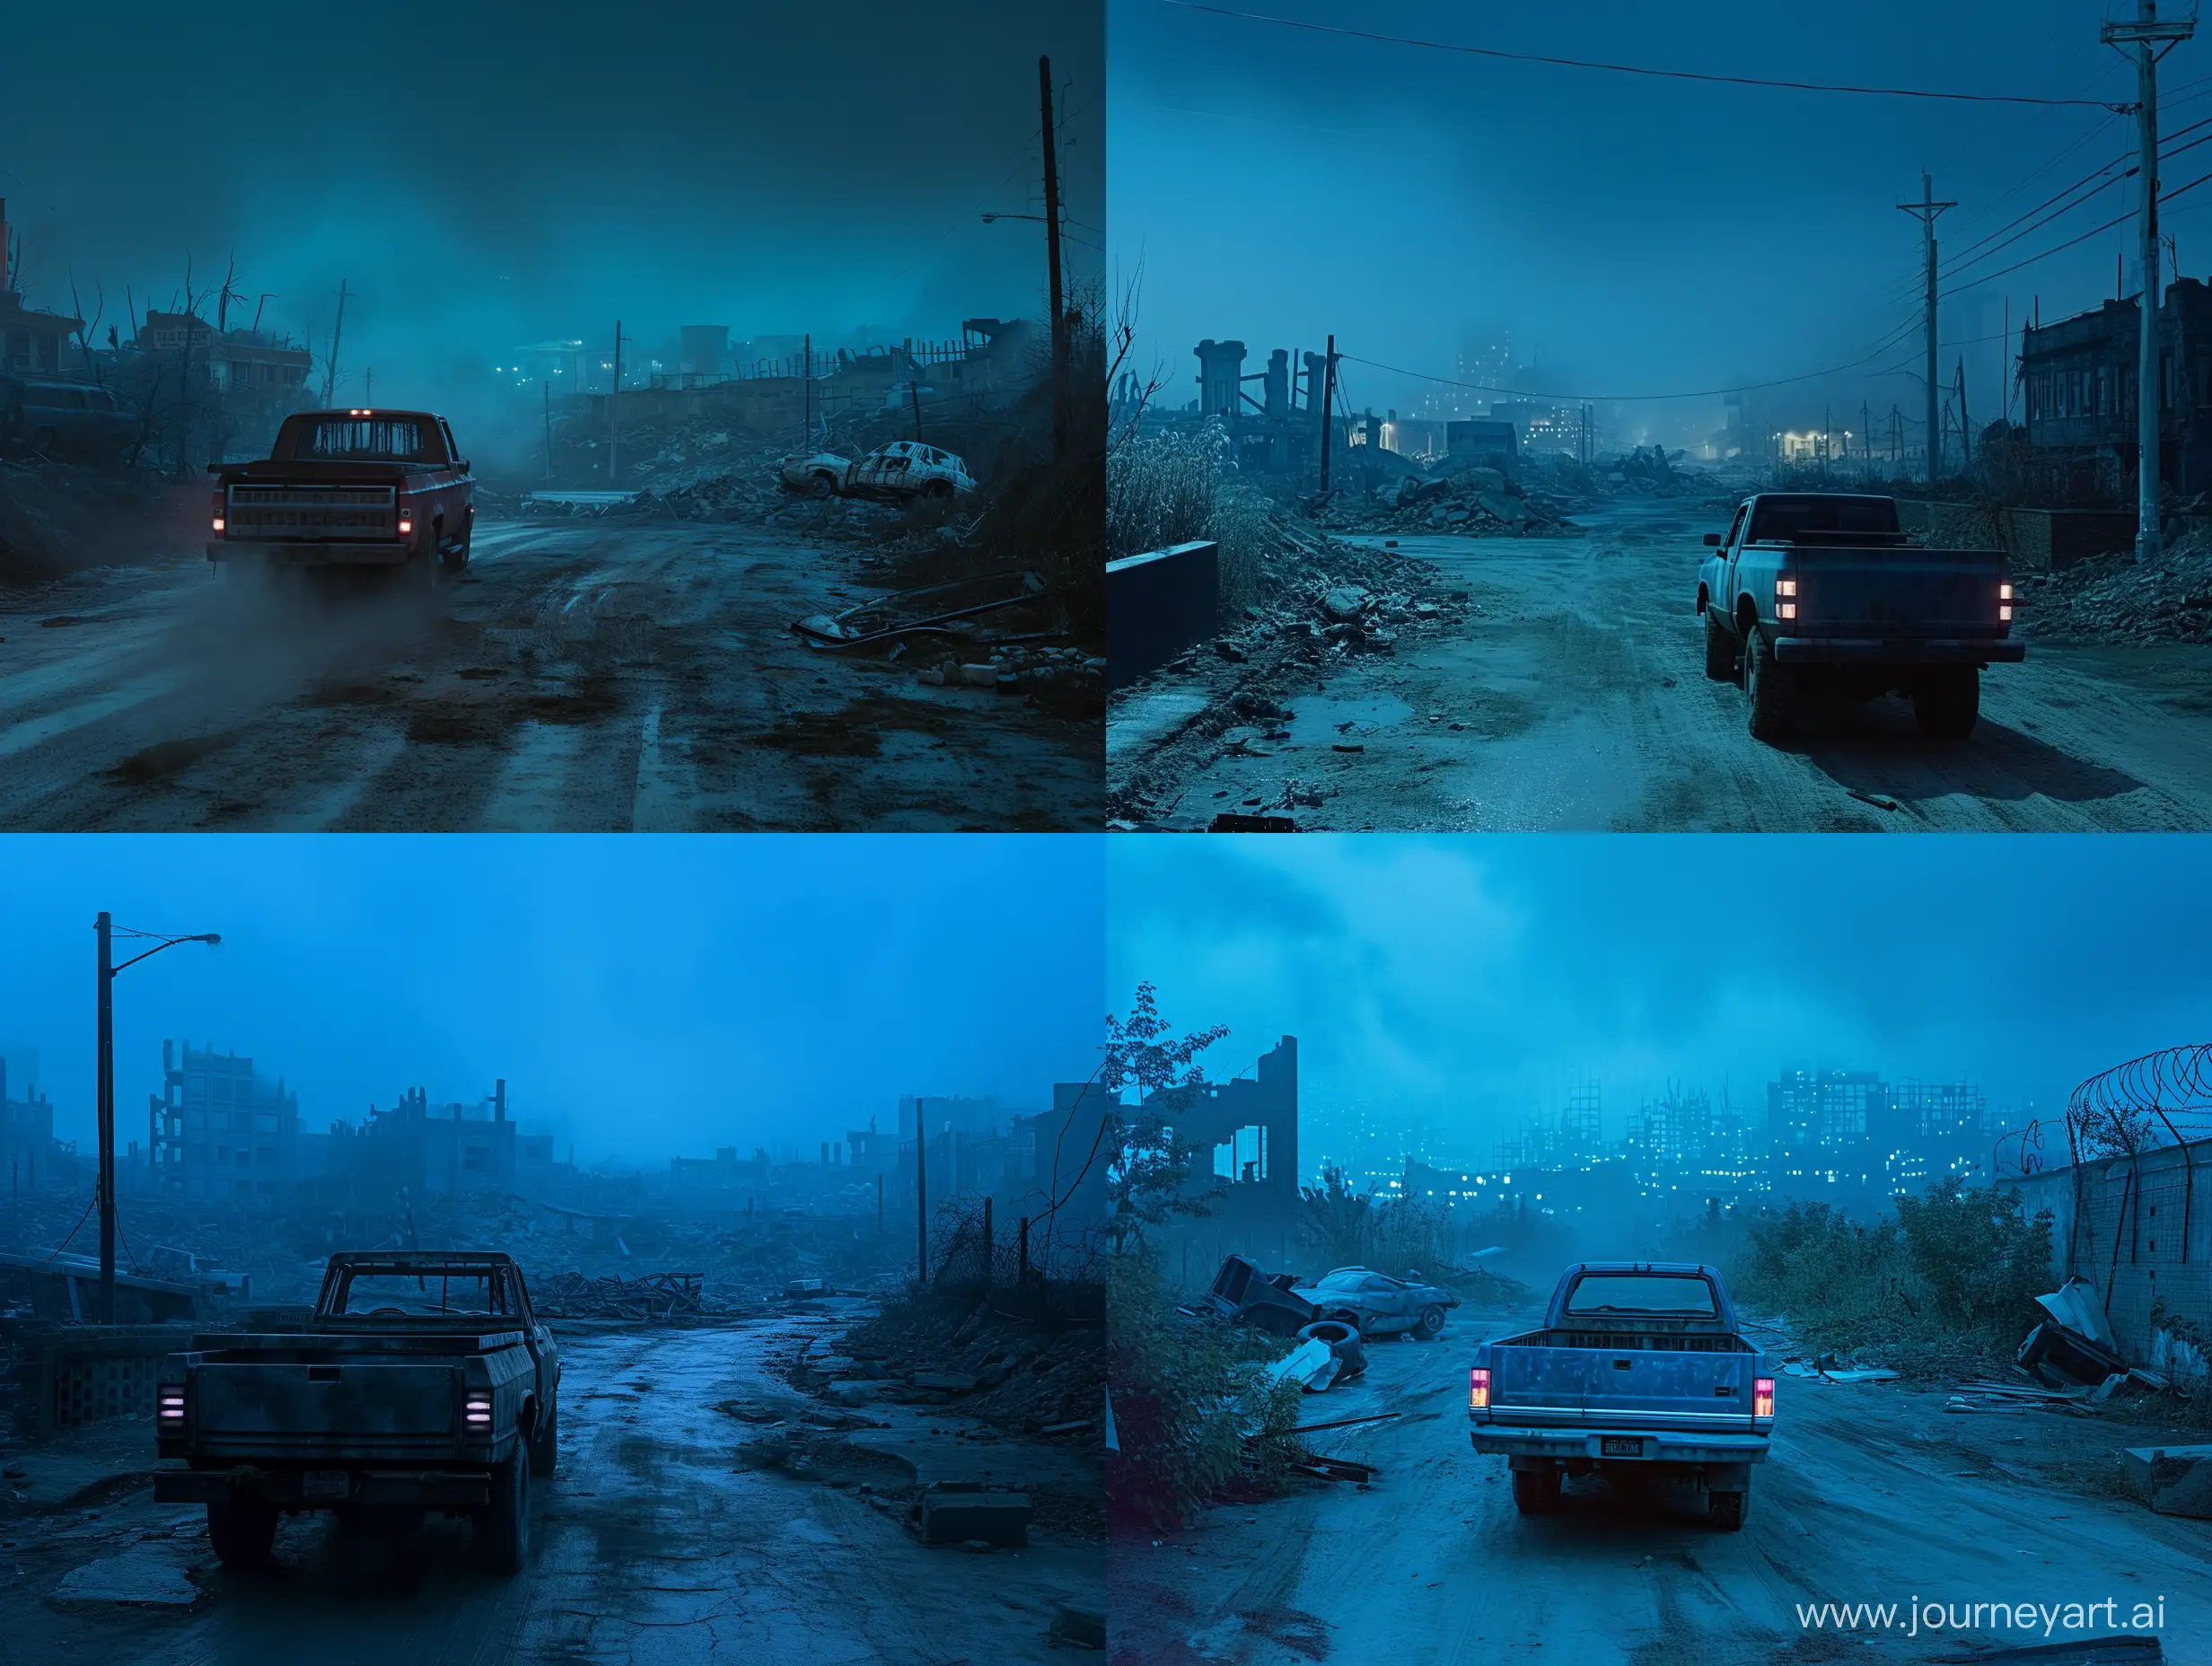 cinematic, movie shot, apocaliptic environment, a truck driving down a dirty street at night, inspired by Gregory Crewdson,  conceptual art, blue fog, still from riverdale,  ruined city in the background